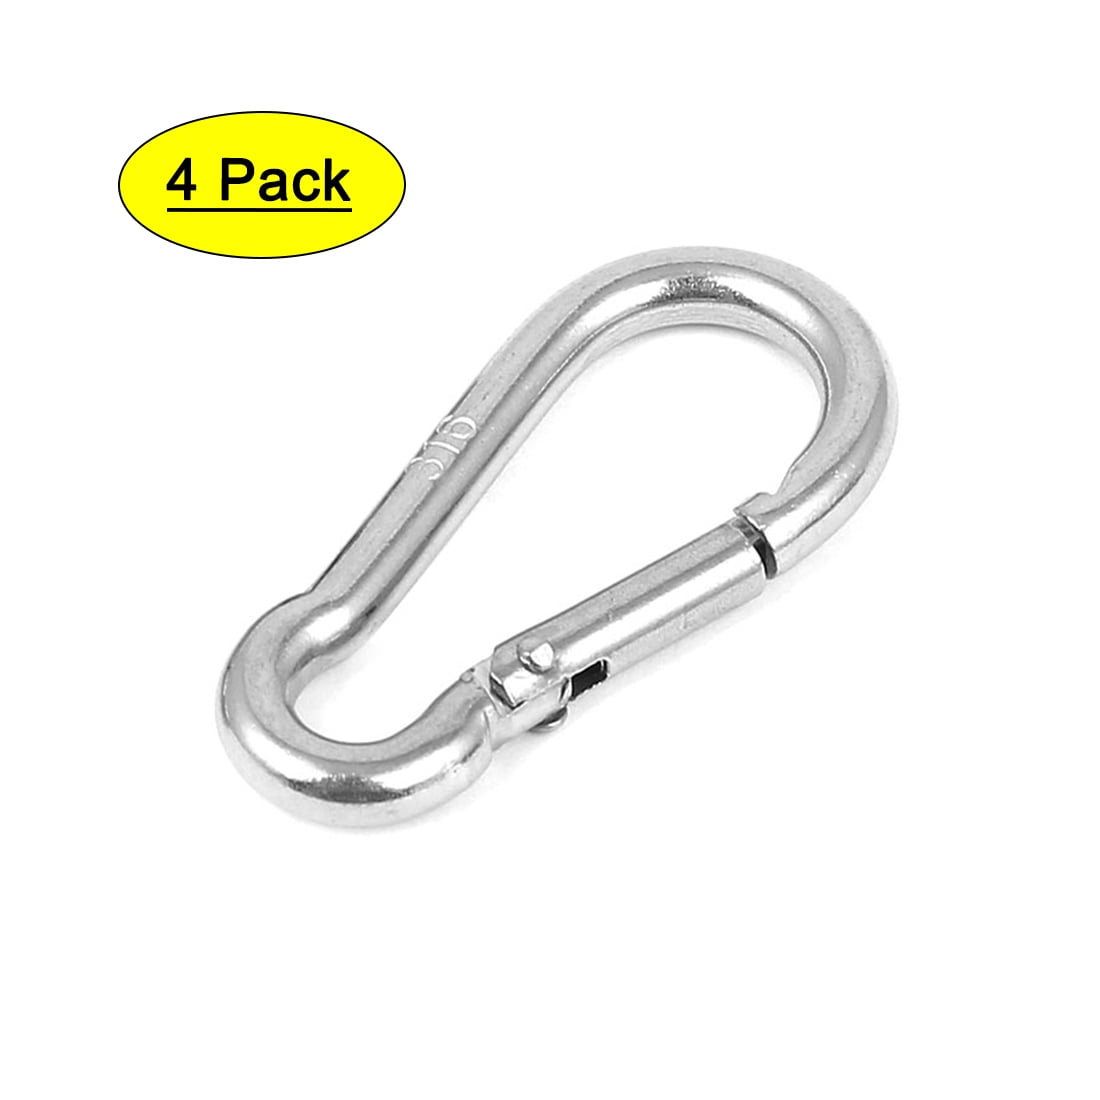 4x Stainless Steel Carabiner Clip Spring Snap Hooks Heavy Duty D Ring Key Chain 